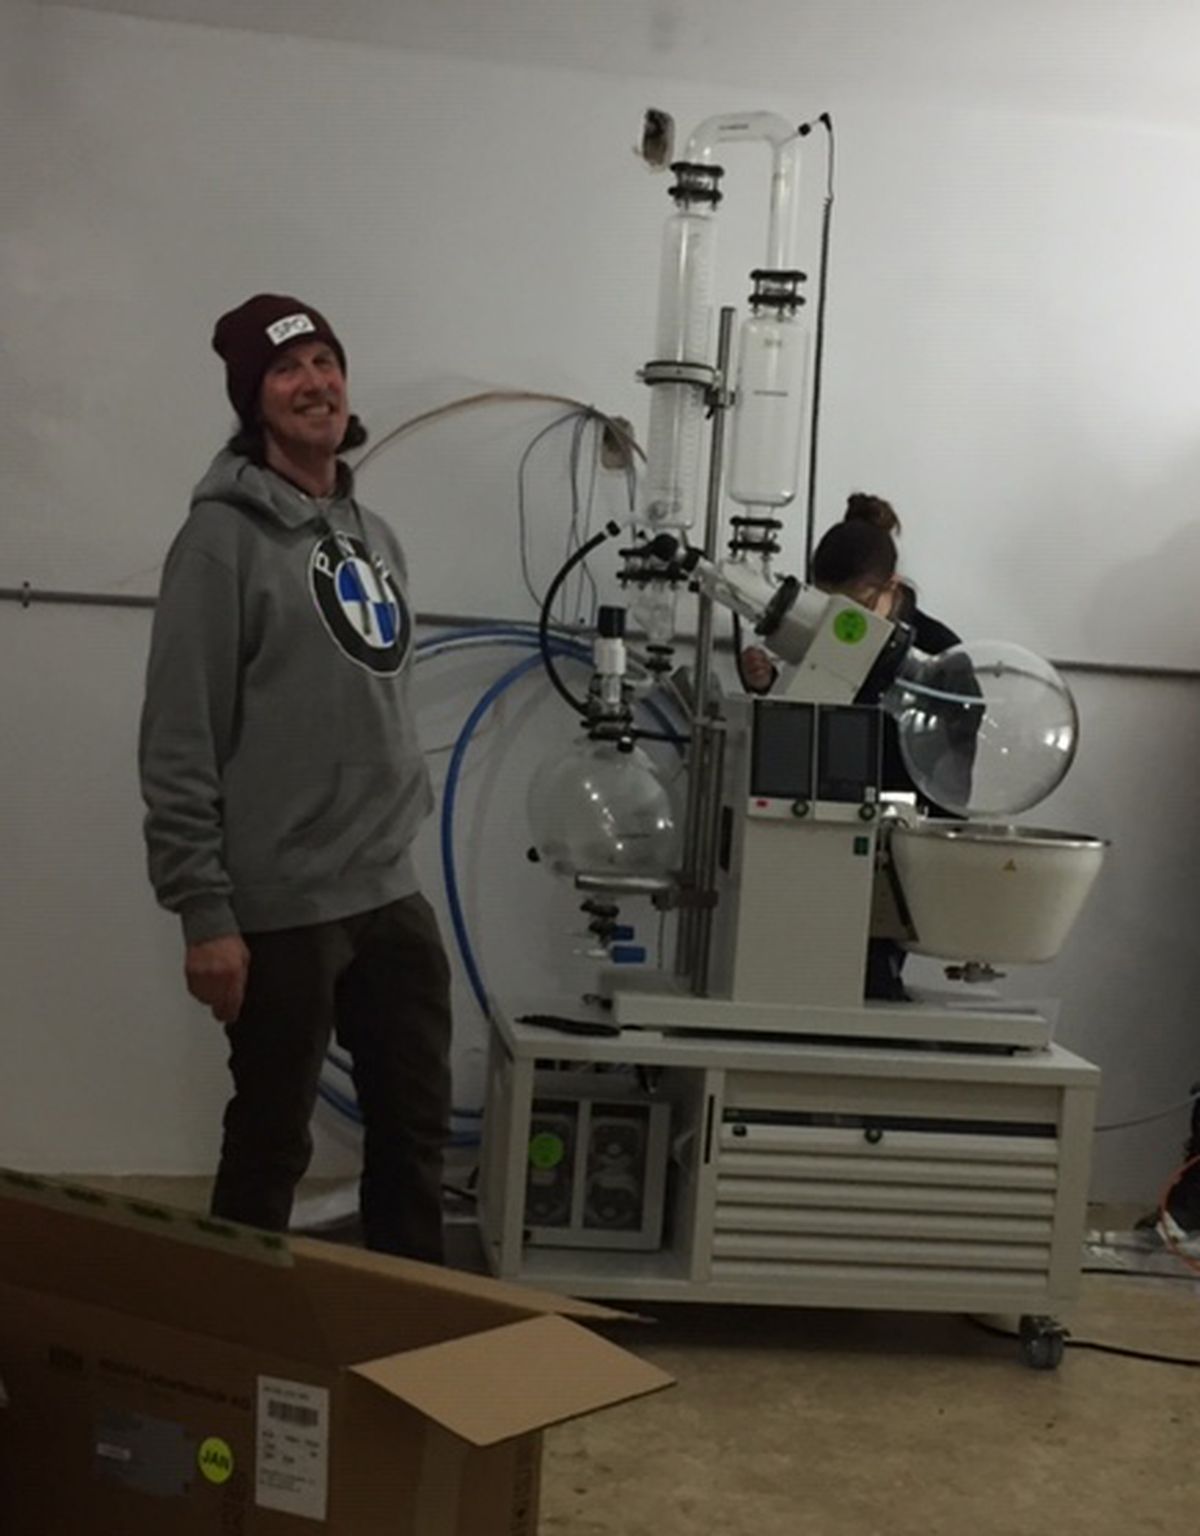 Michael Early, concentrate manager at New Day Cannabis, is part of the team working on new processes to improve the quality and purity of extracted cannabis products.  (Courtesy New Day Cannabis)